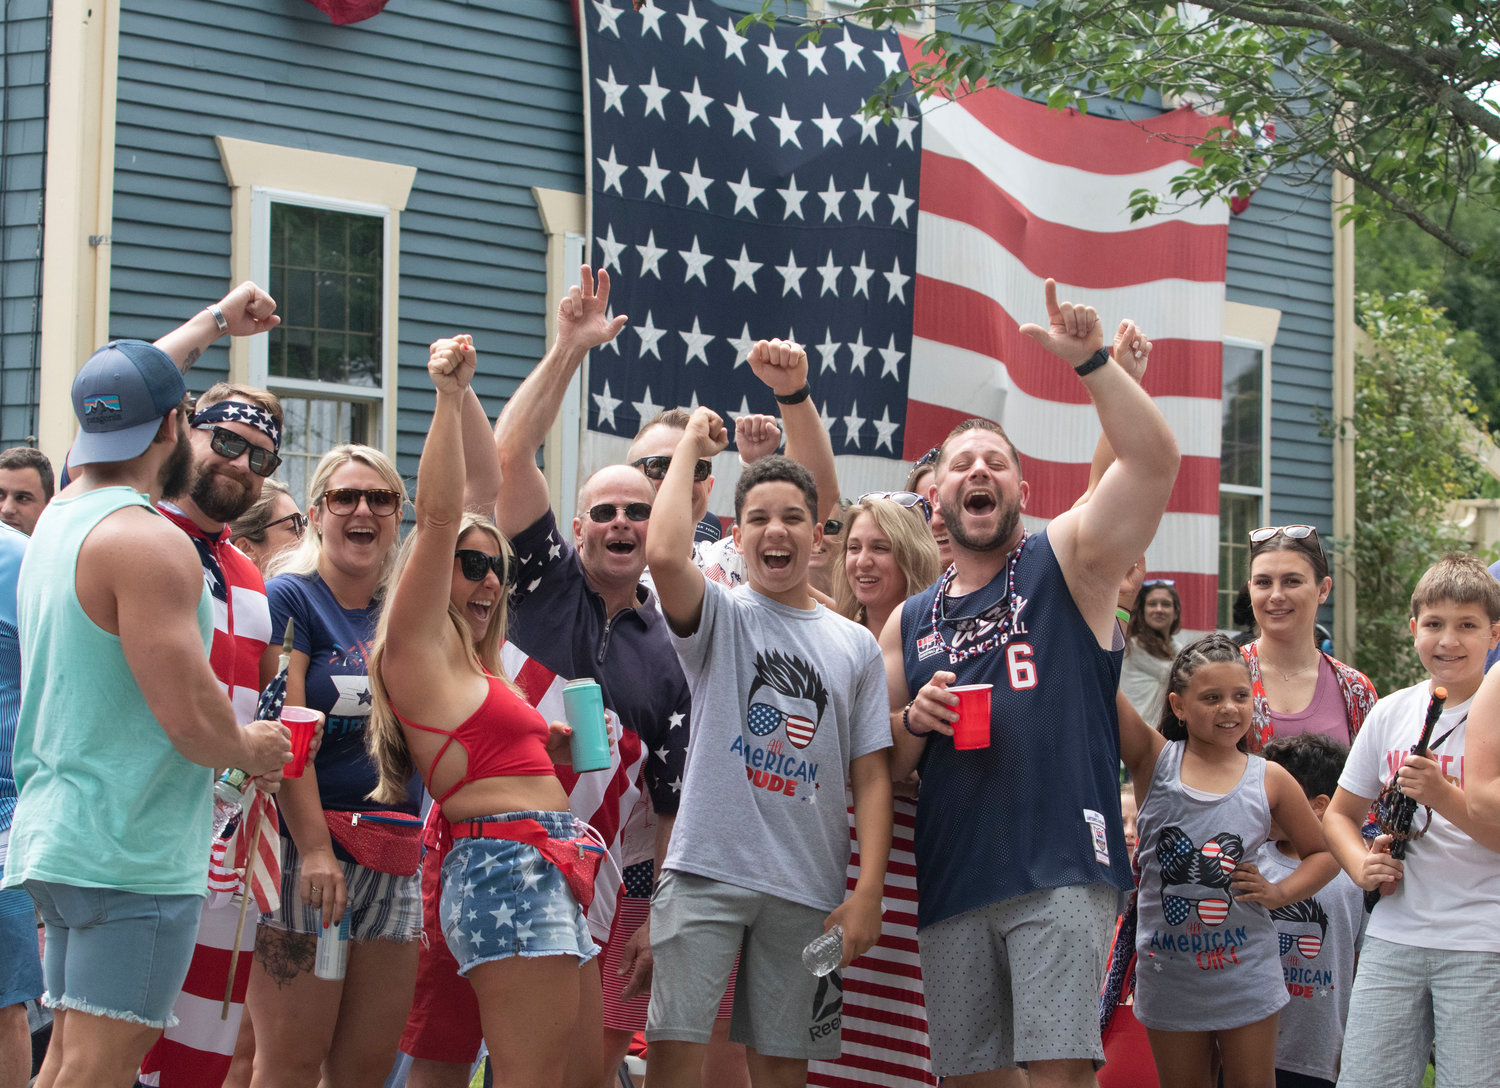 Daniel Coffland (right) and friends cheer during the parade, in front of his house on Hope Street.